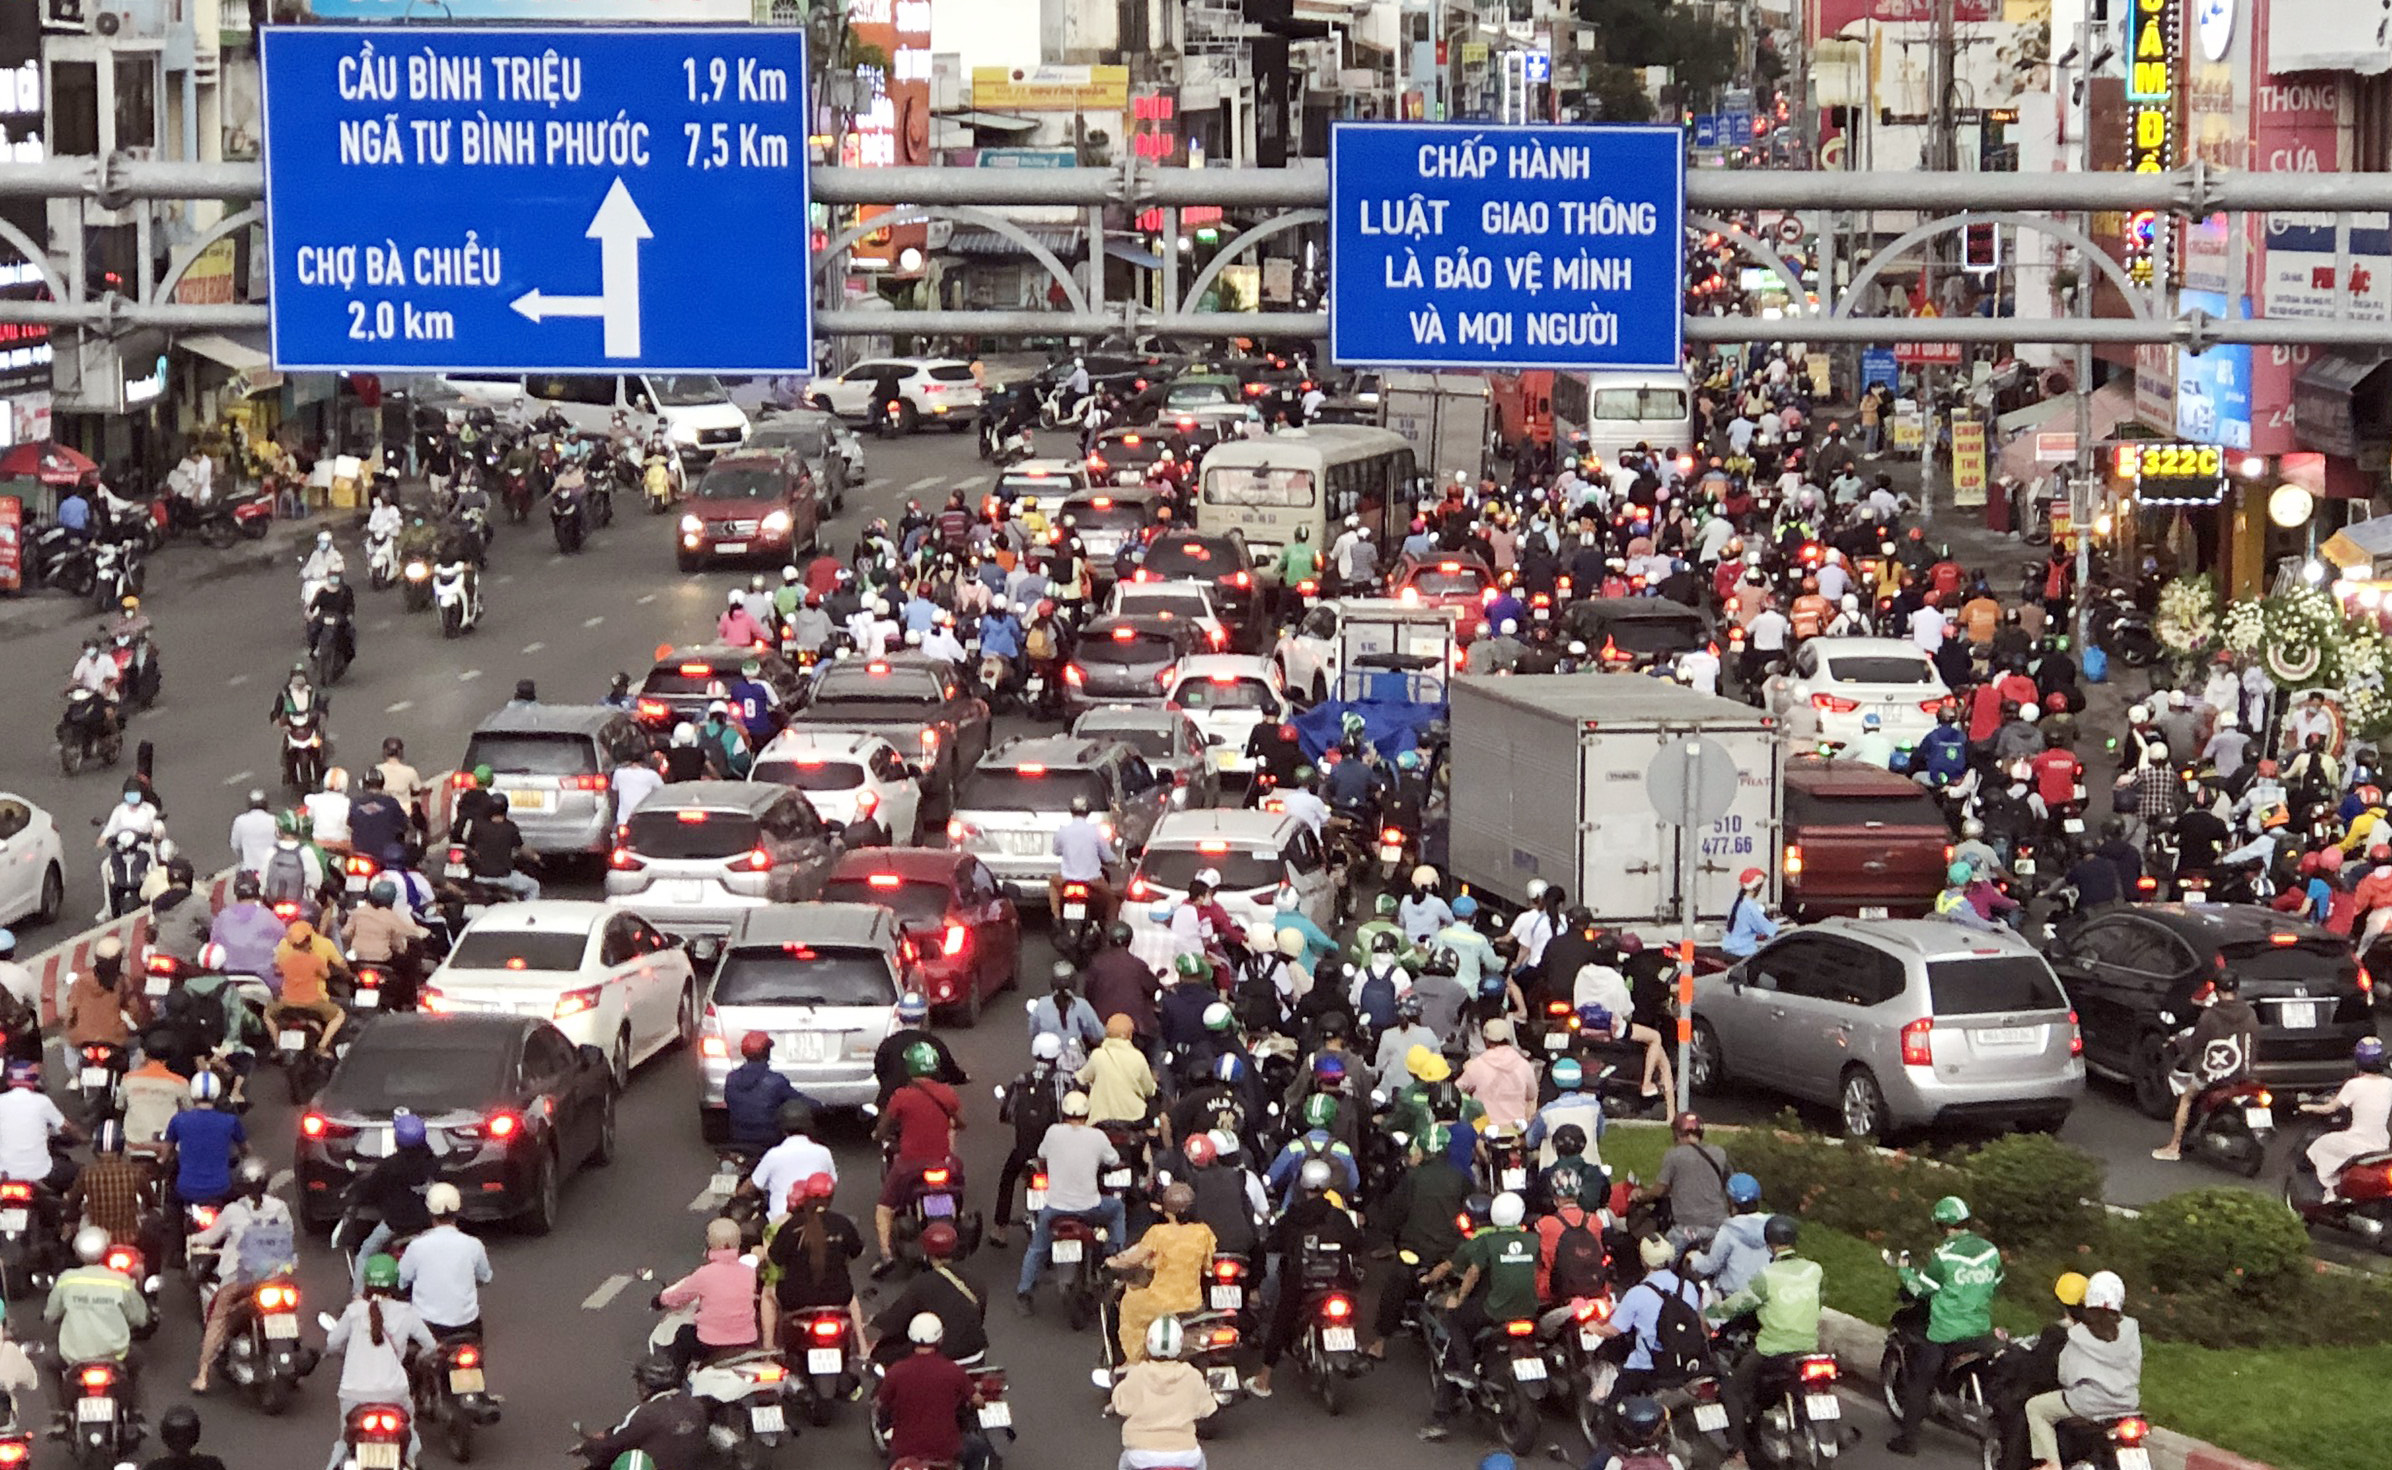 The line of cars followed each other back to their hometown for the holidays of April 30 and May 1, the roads of Hanoi and Ho Chi Minh City were jammed - 28